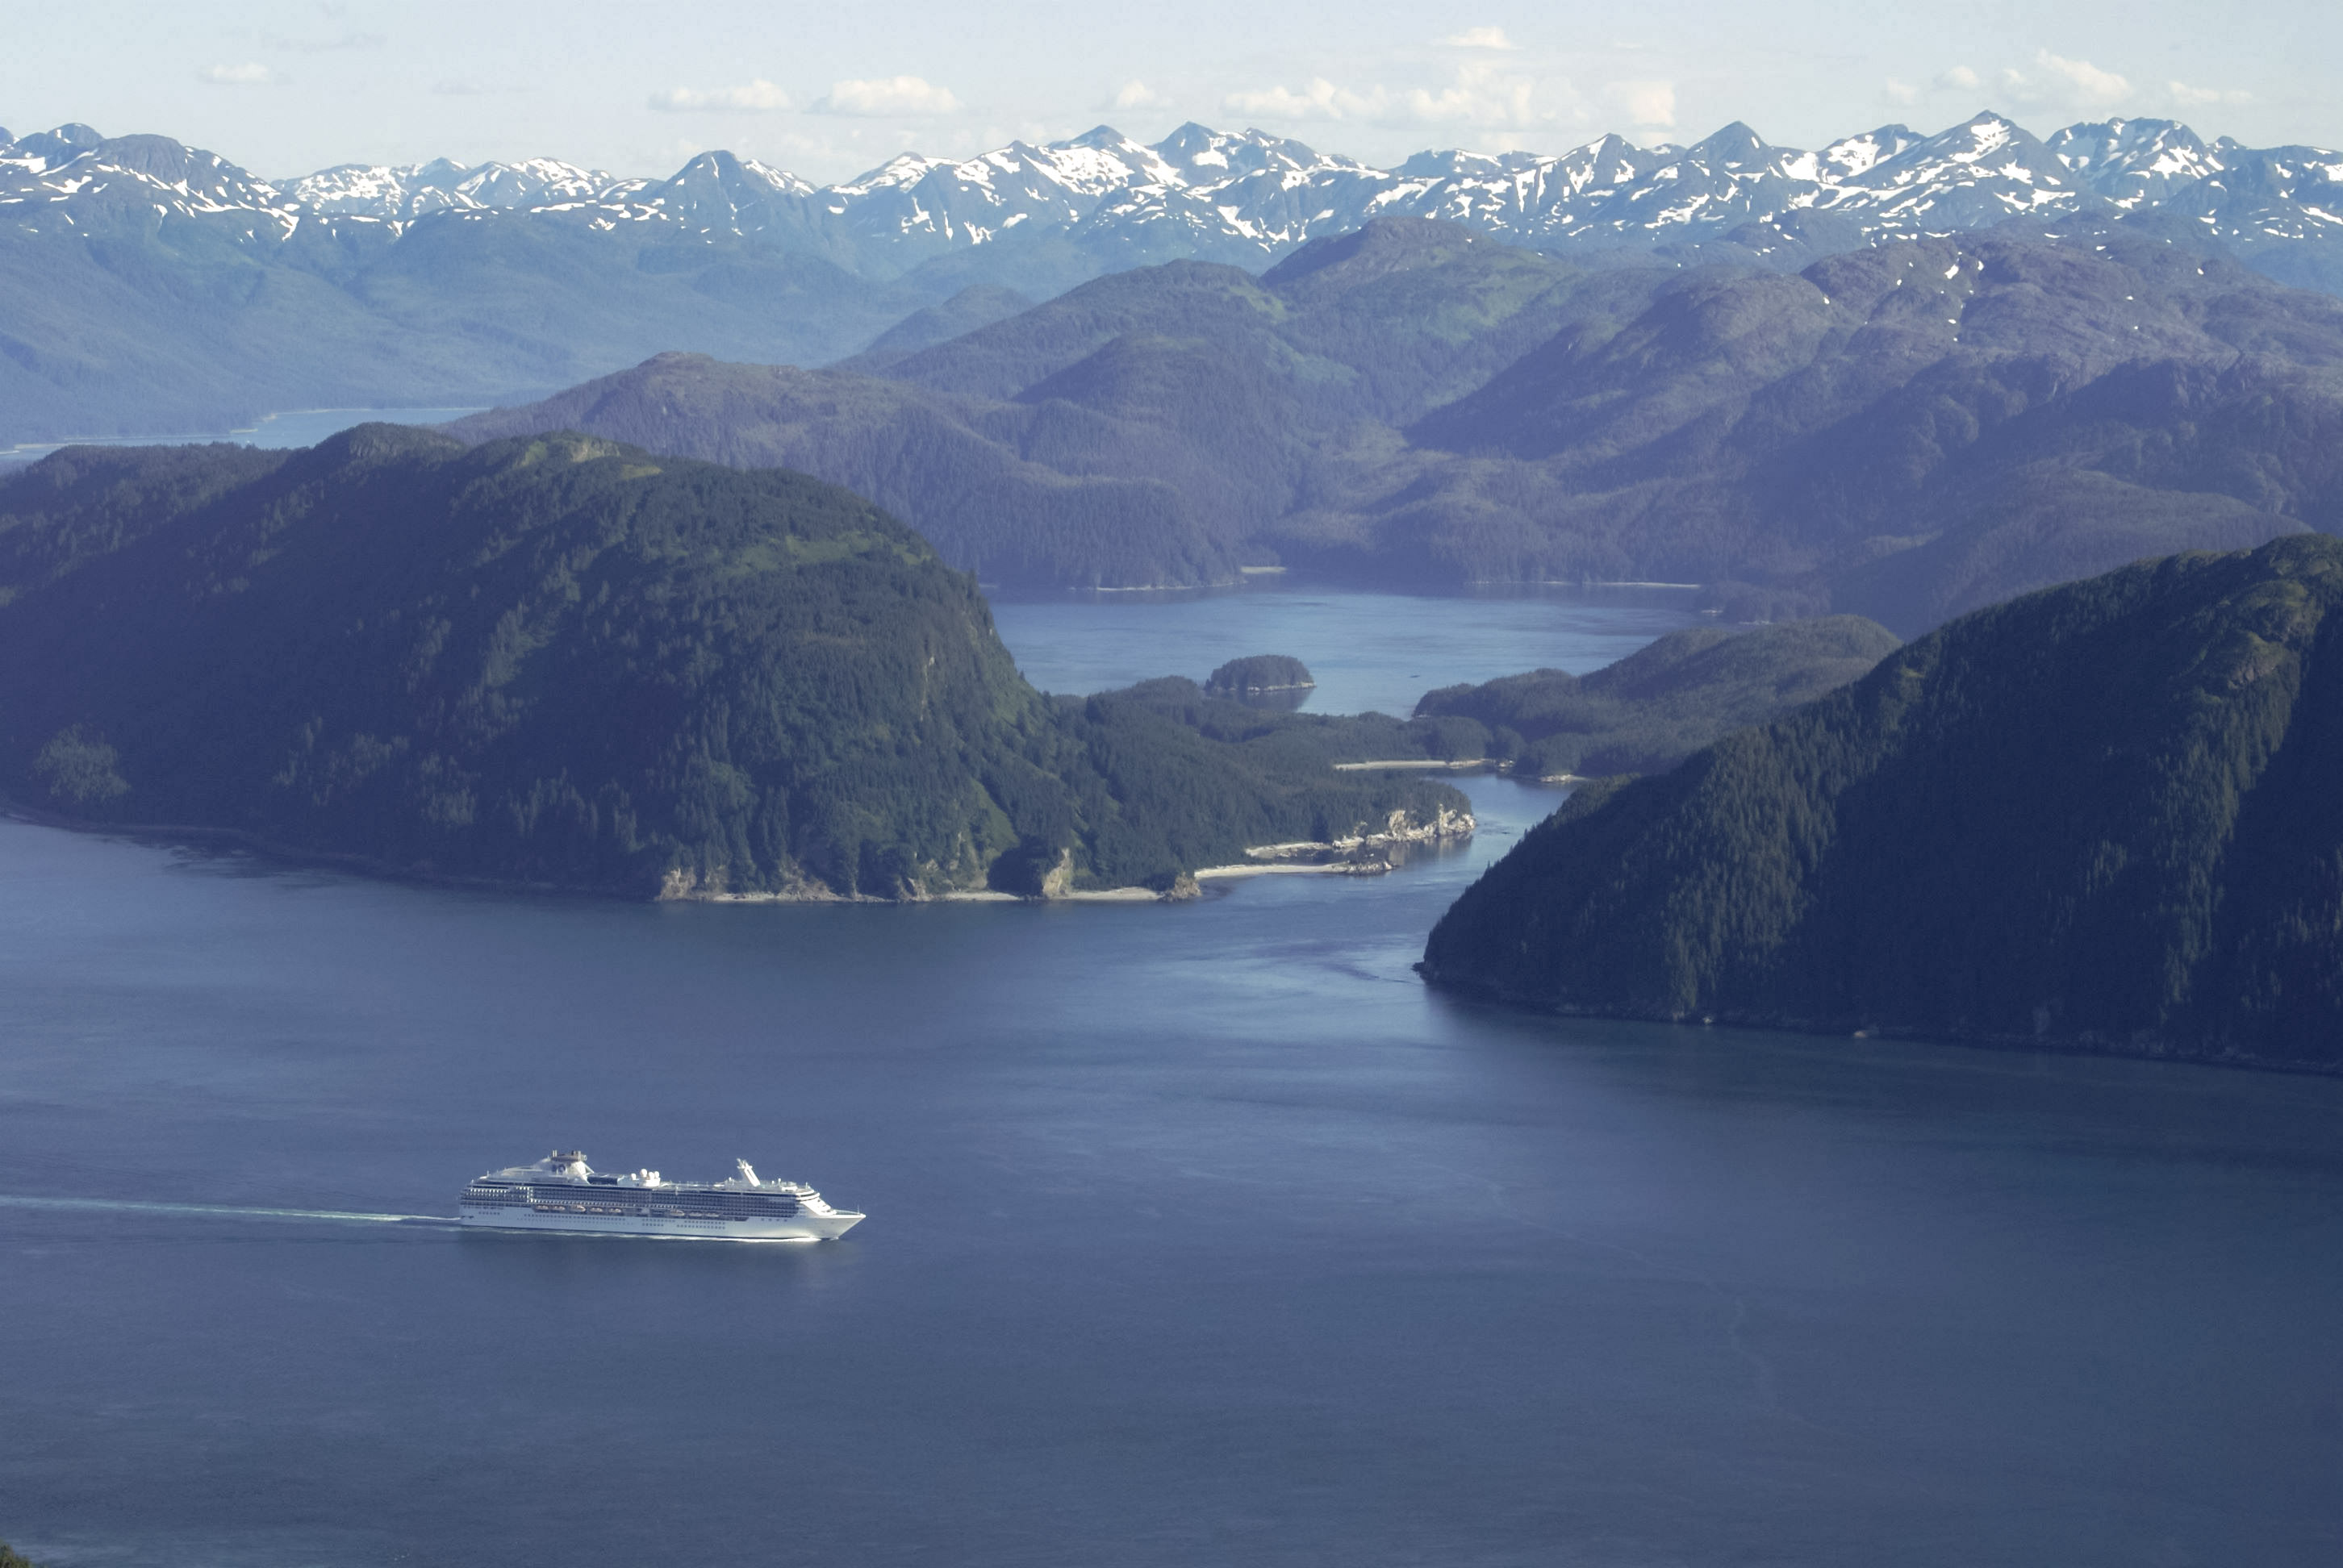 Aerial view of a white cruise ship boating through a large bay lined with mountains.